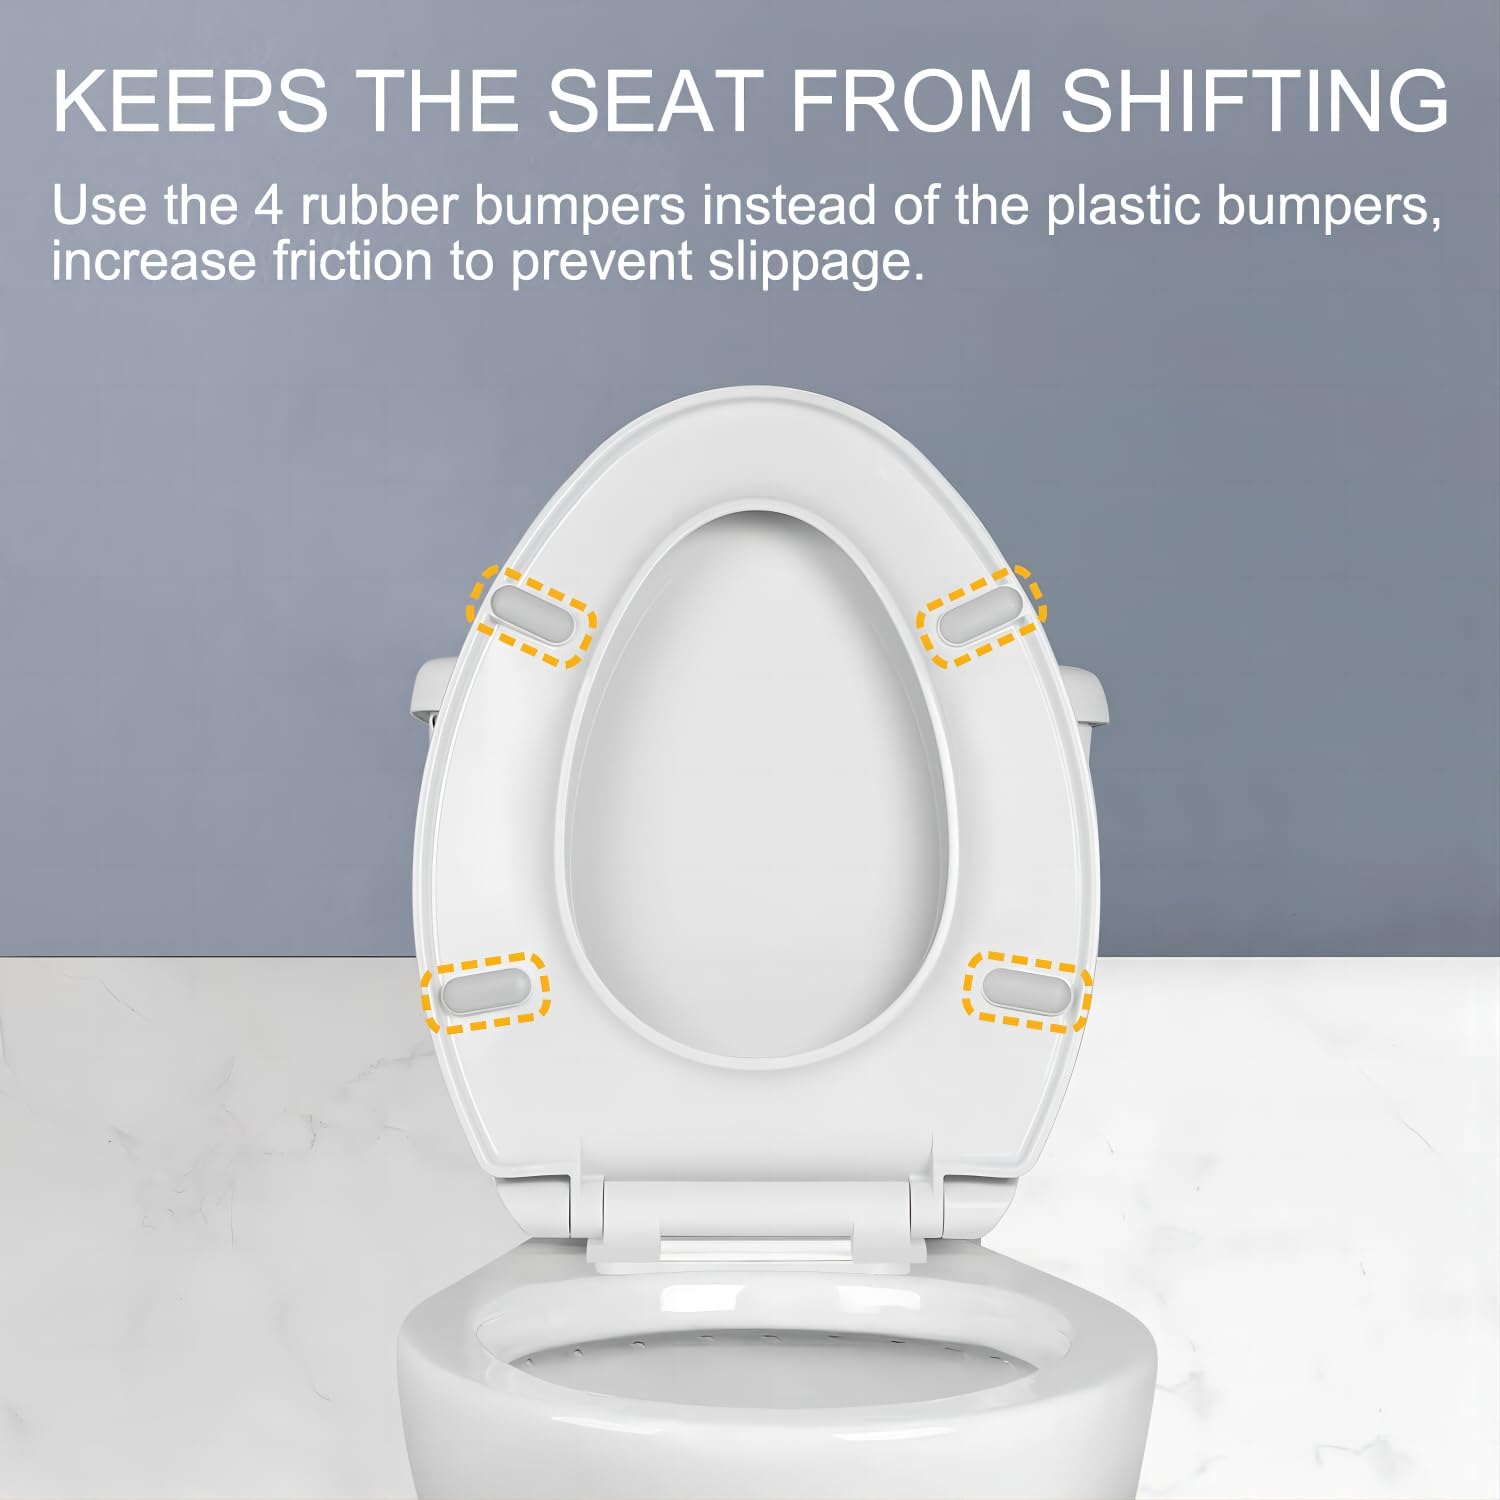 Round Toilet Seat Slow Quiet Close Seat Cover Fit Standard Round Toilet White Toilet Seat with Metal Inserts Easy to Install, Non-slip Seat with Rubber Bumpers Provides Comfort Relieves Pressure Point